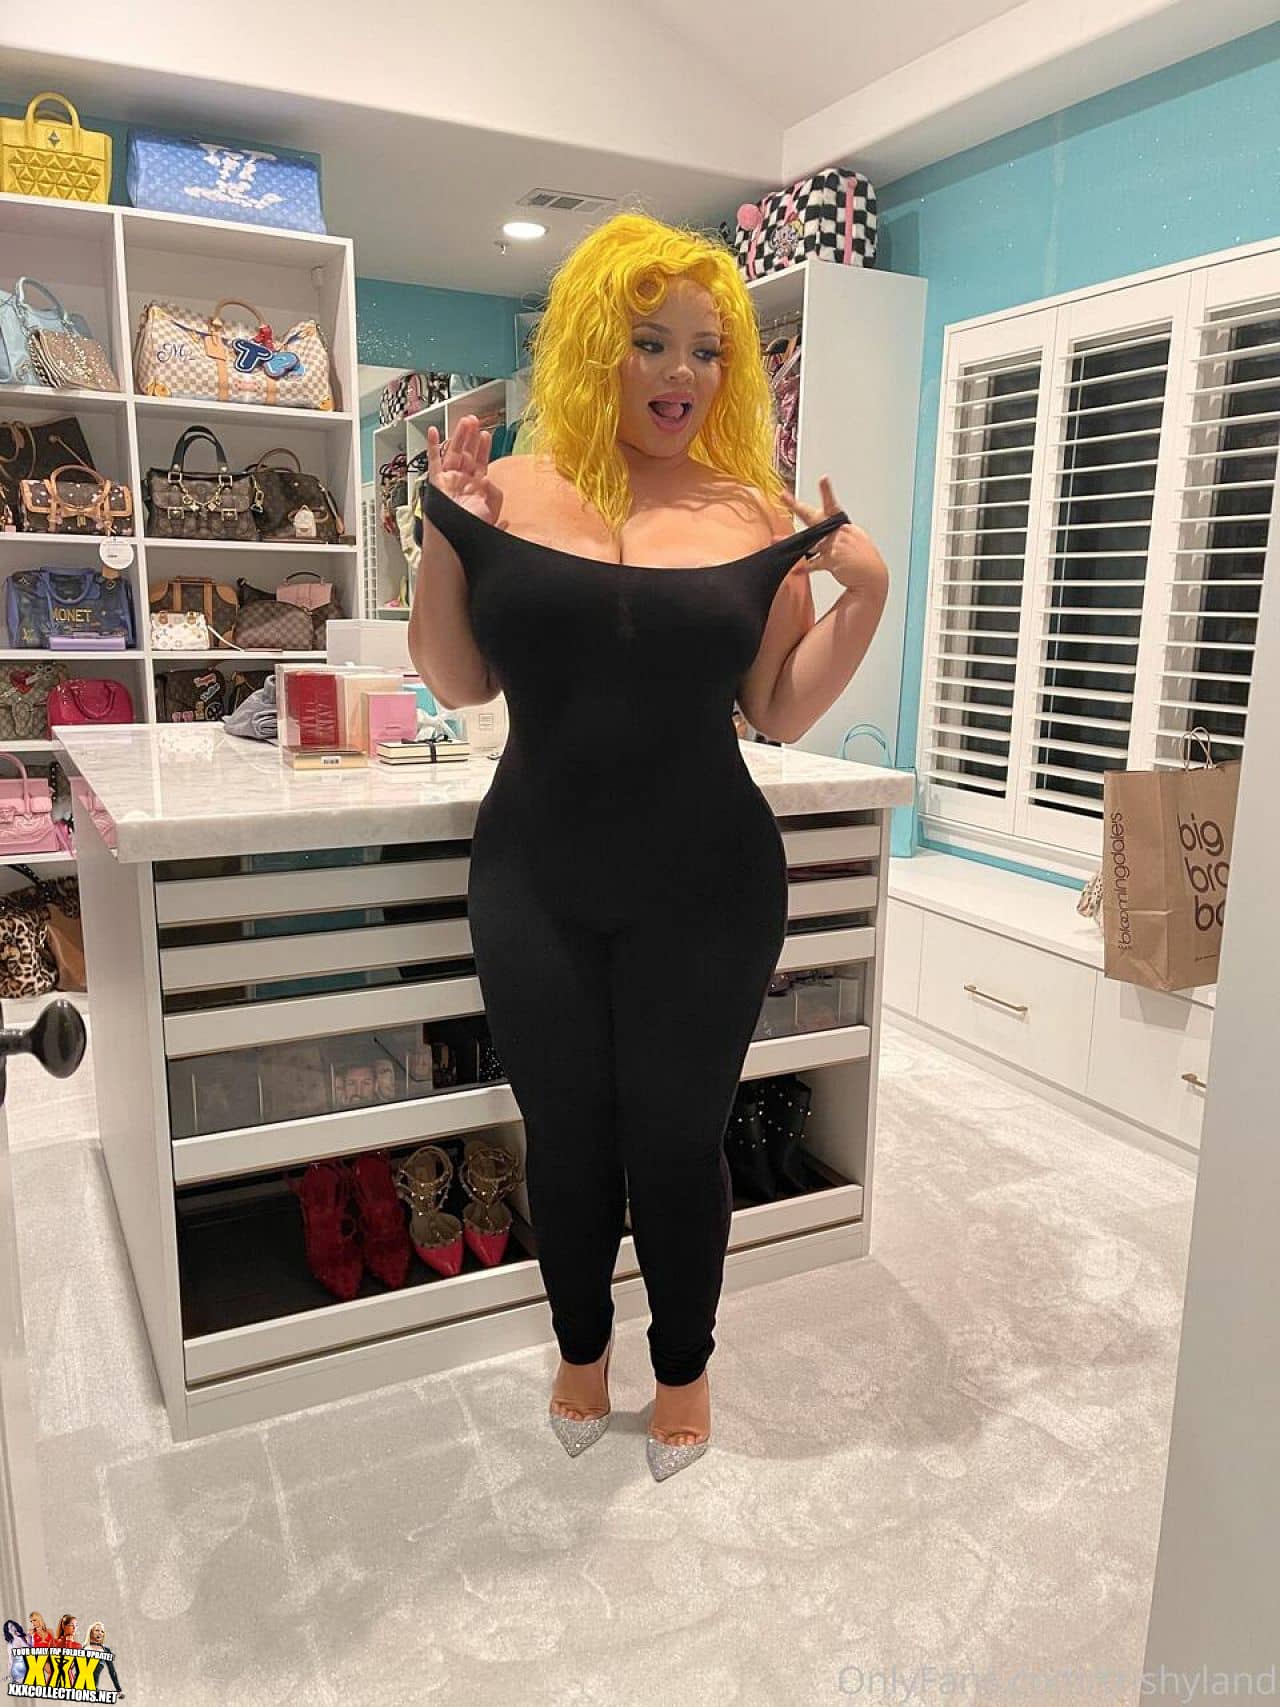 Trisha Paytas Onlyfans Review